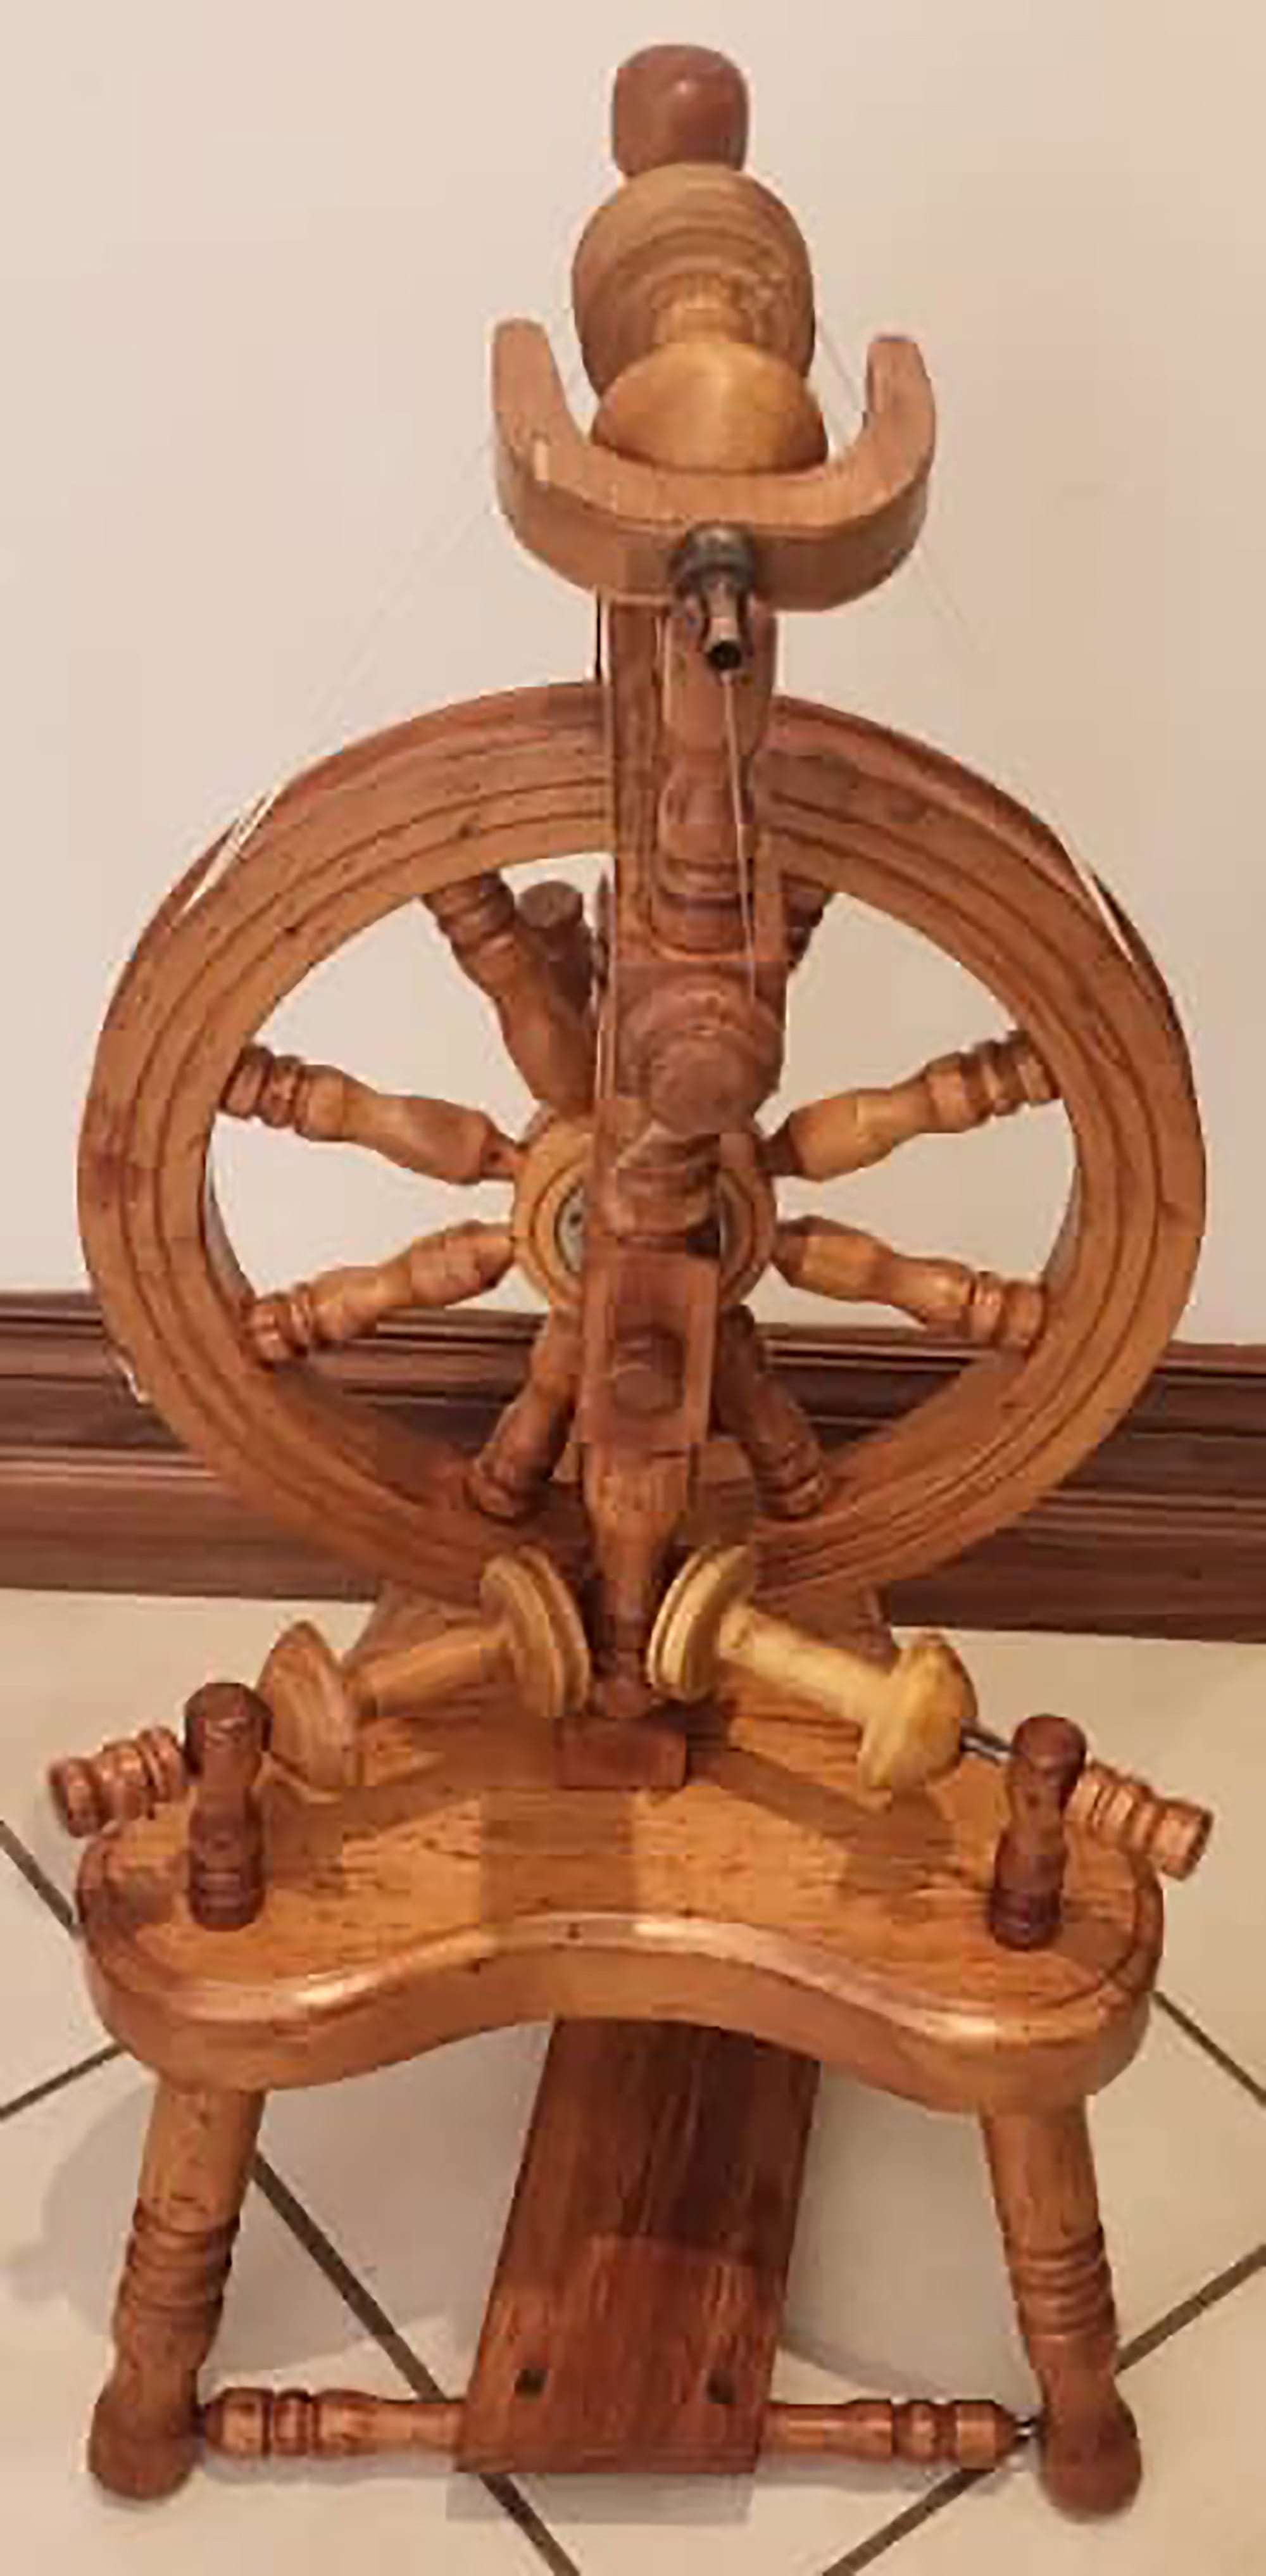 Photograph of the artist's spinning wheel.